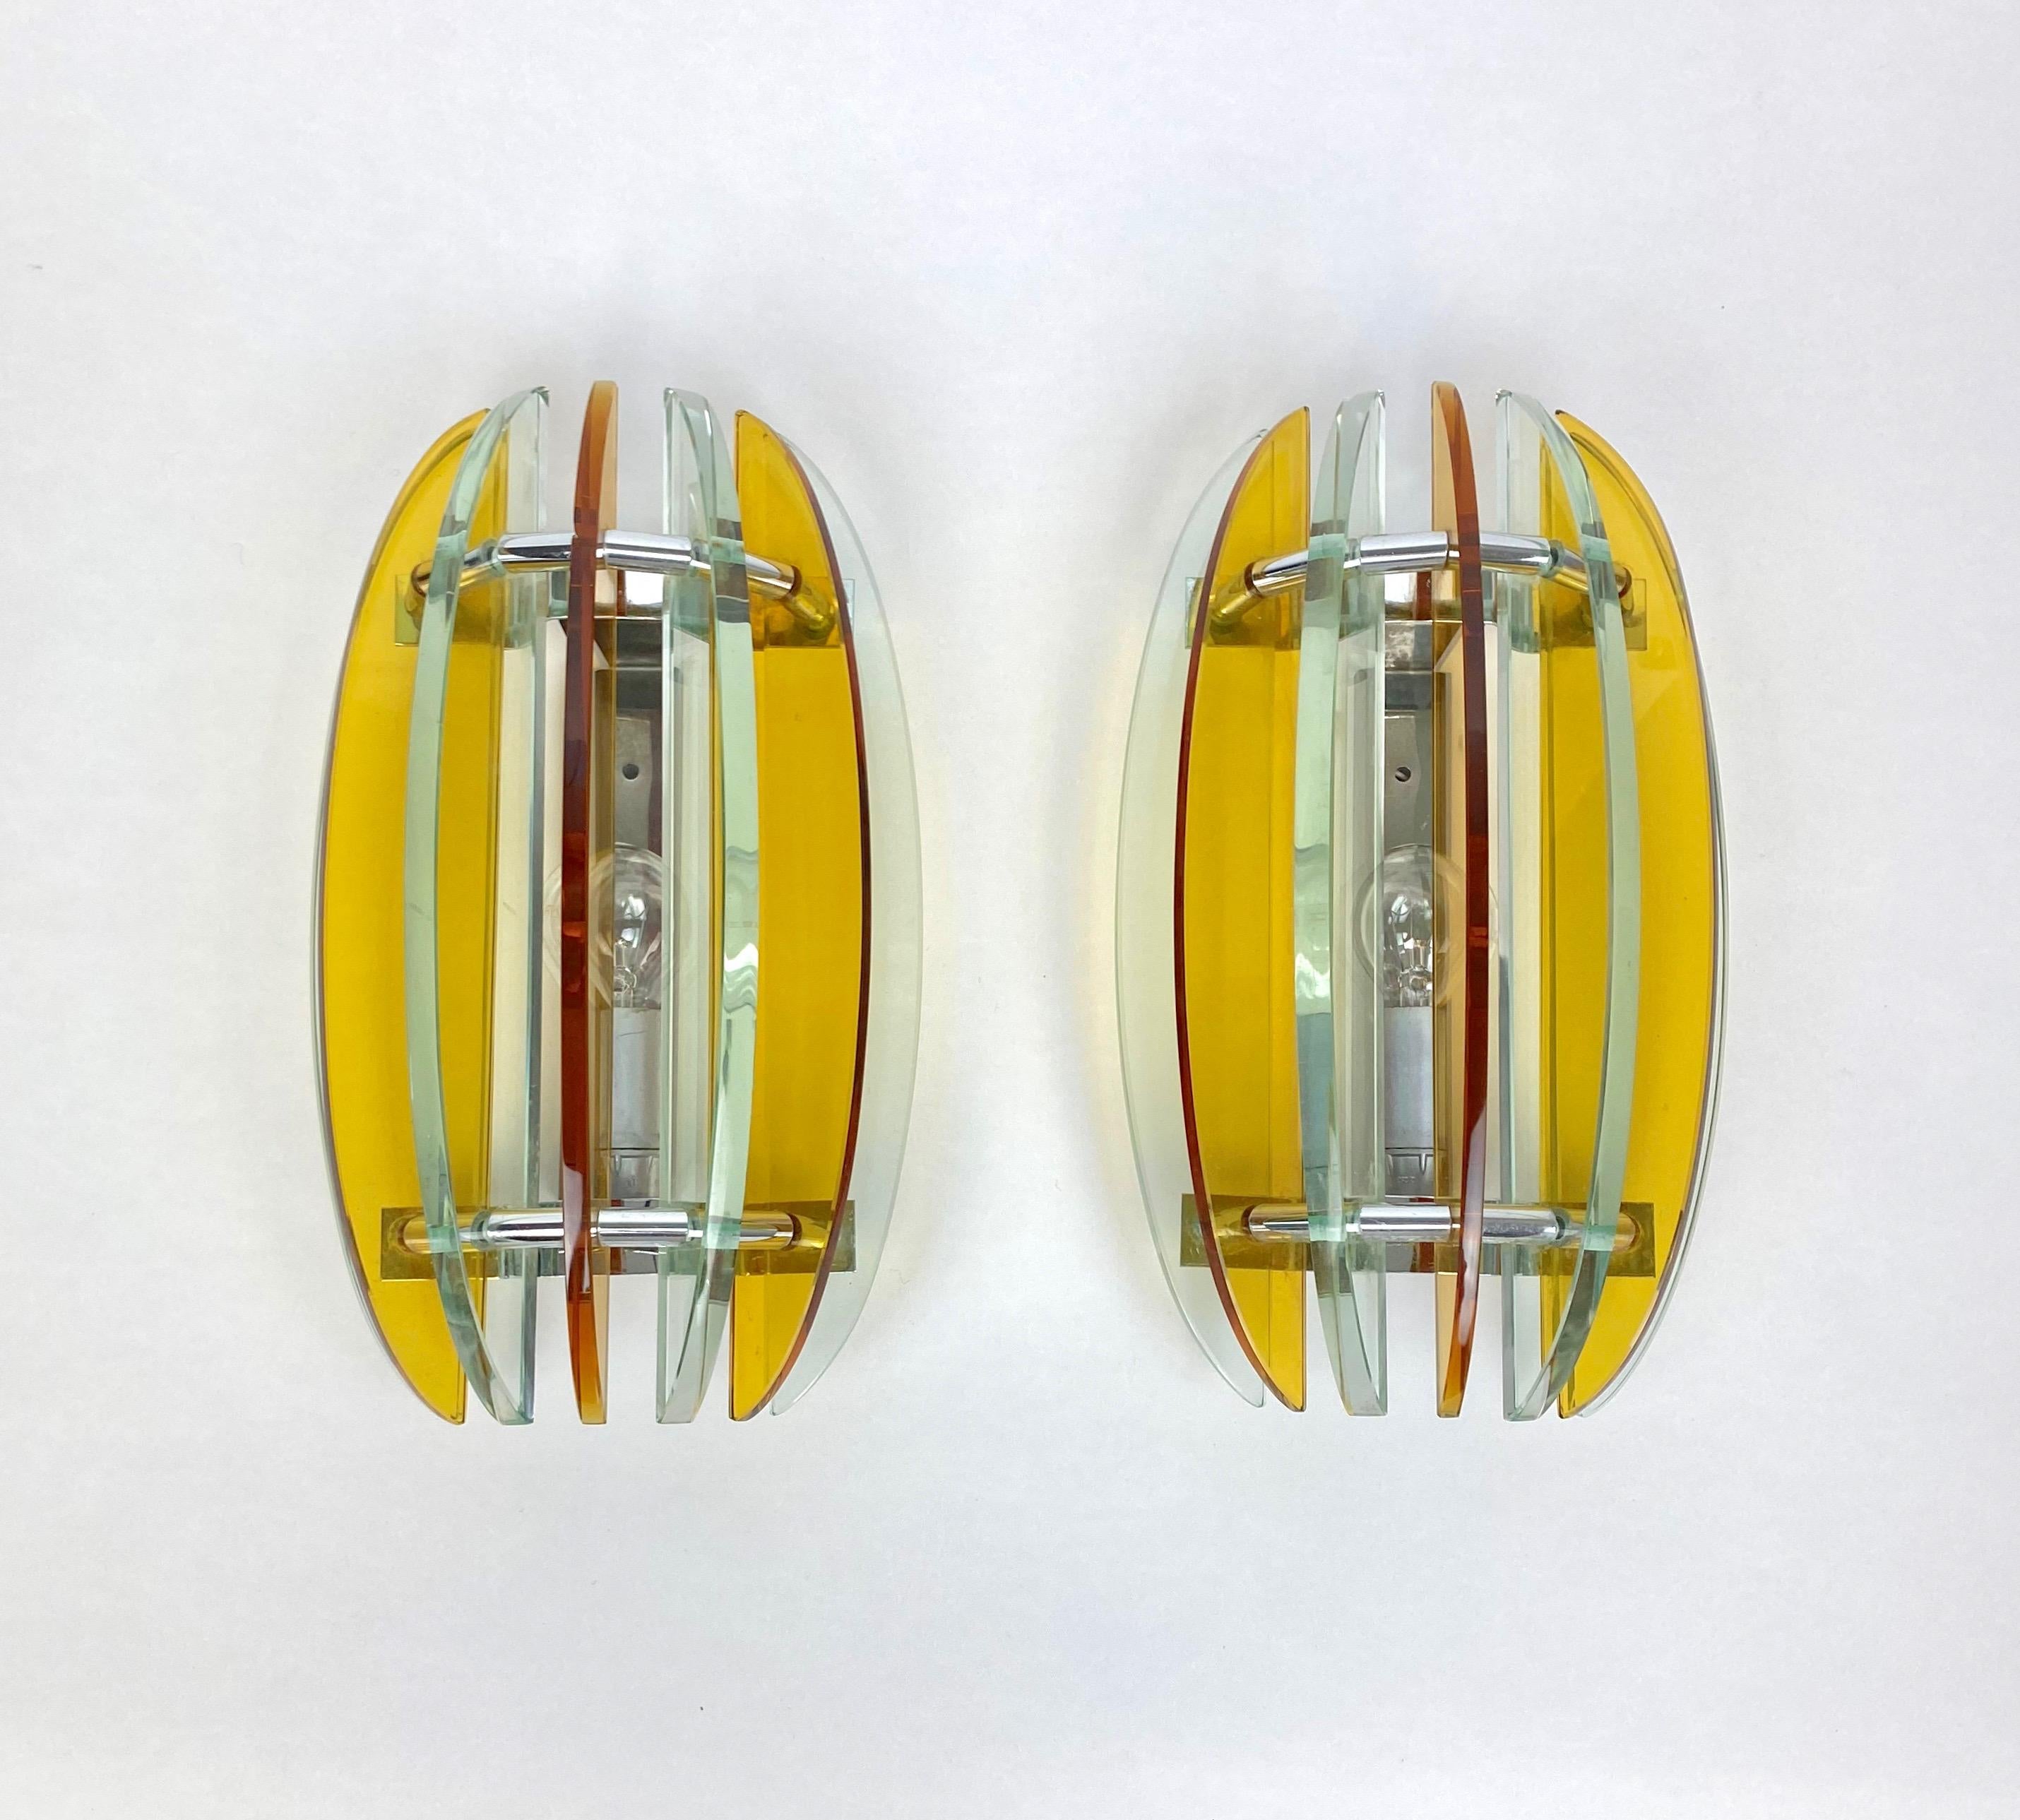 Pair of wall sconces in colored glass (yellow, orange and green) and chrome by Veca, Italy, 1970s. 

The original label is still attached.